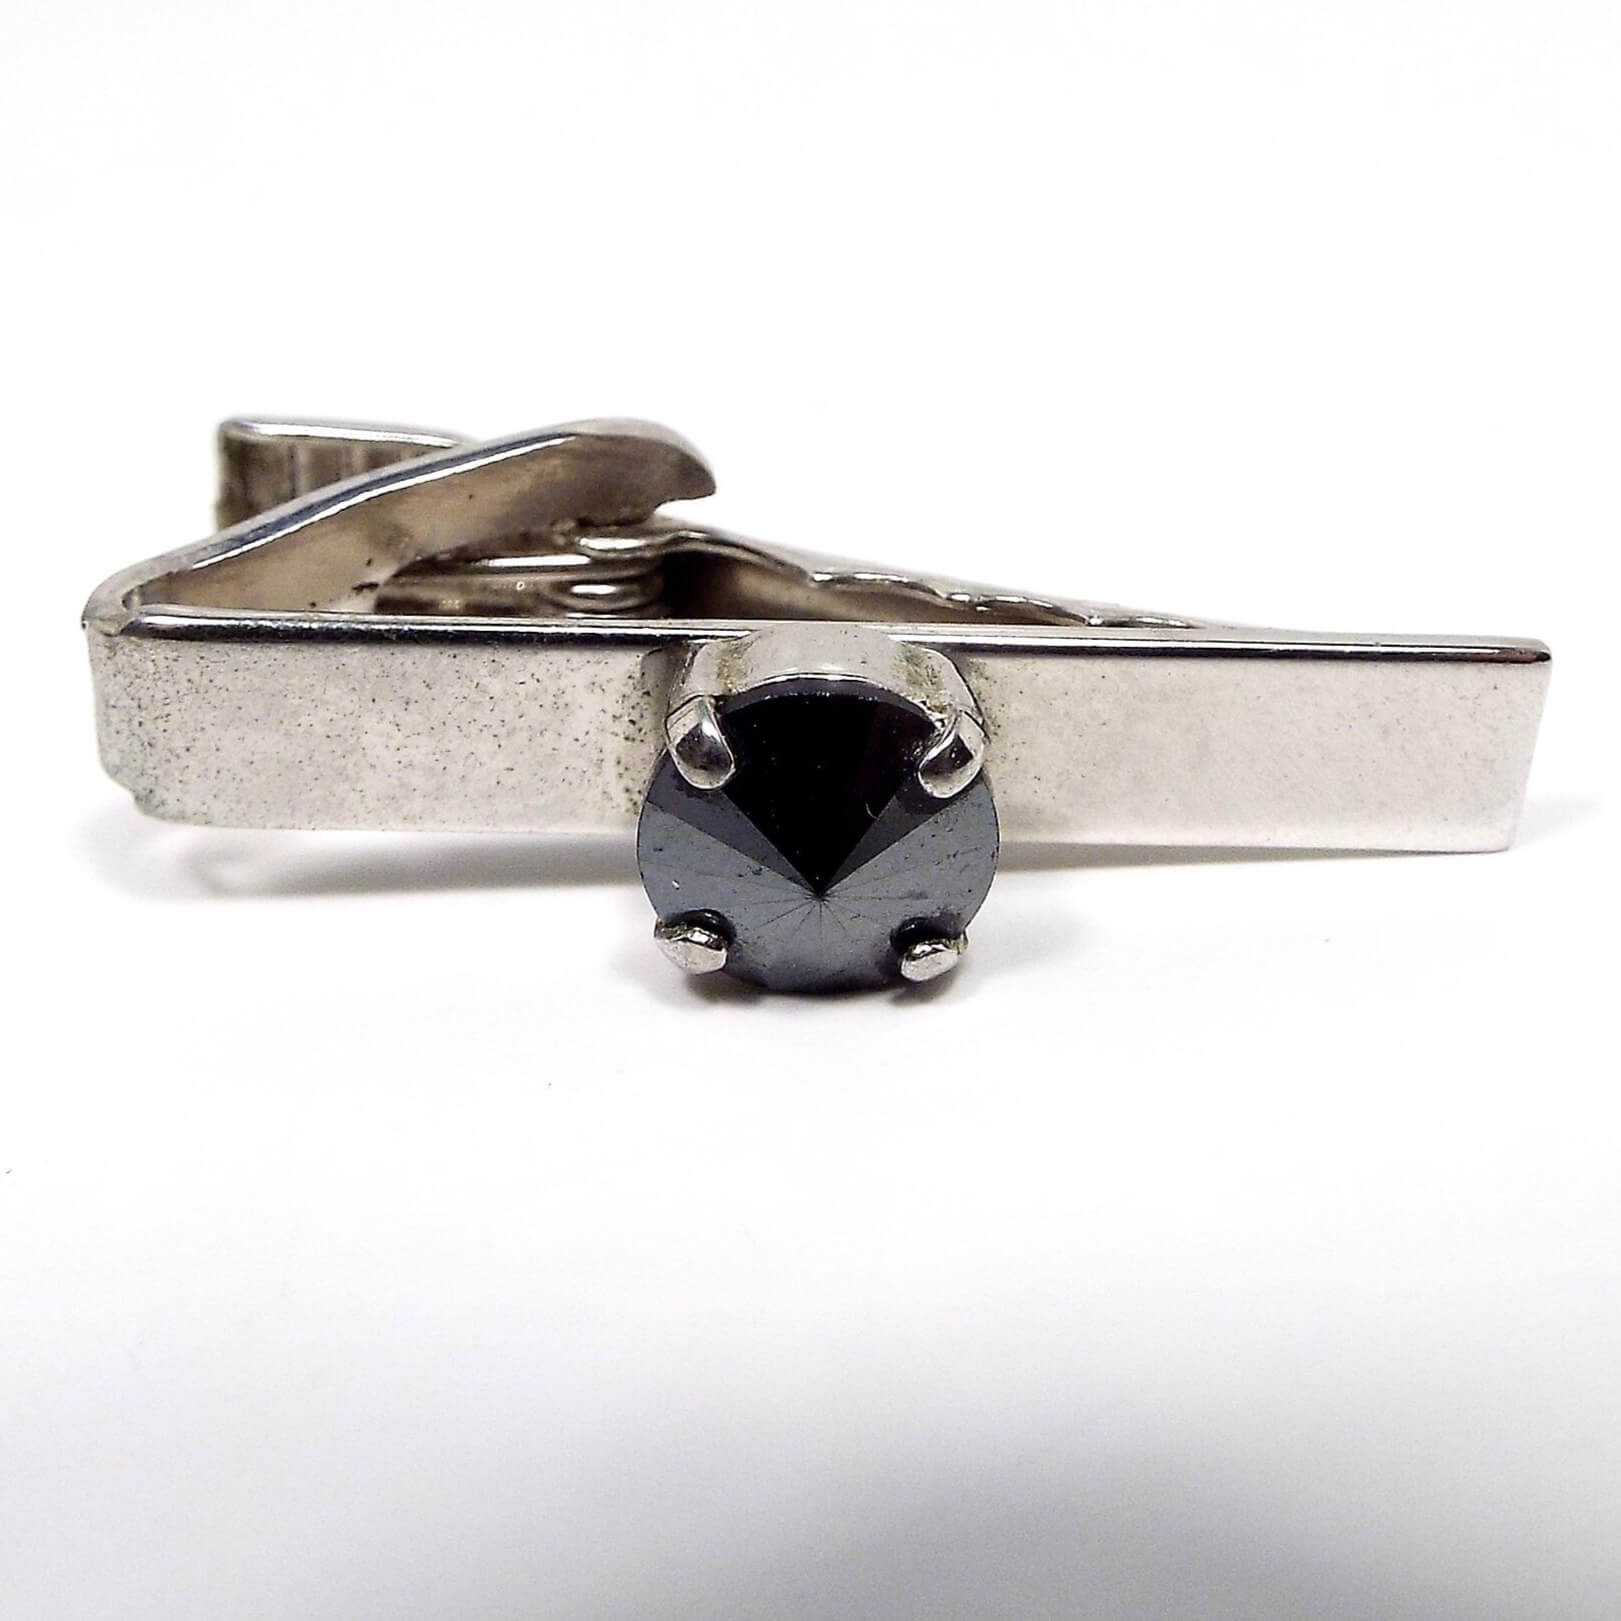 Front view of the Mid Century vintage faux hematite tie clip. The metal is silver tone in color. In the middle is a prong set rivoili rhinestone that is dark metallic gray in color.